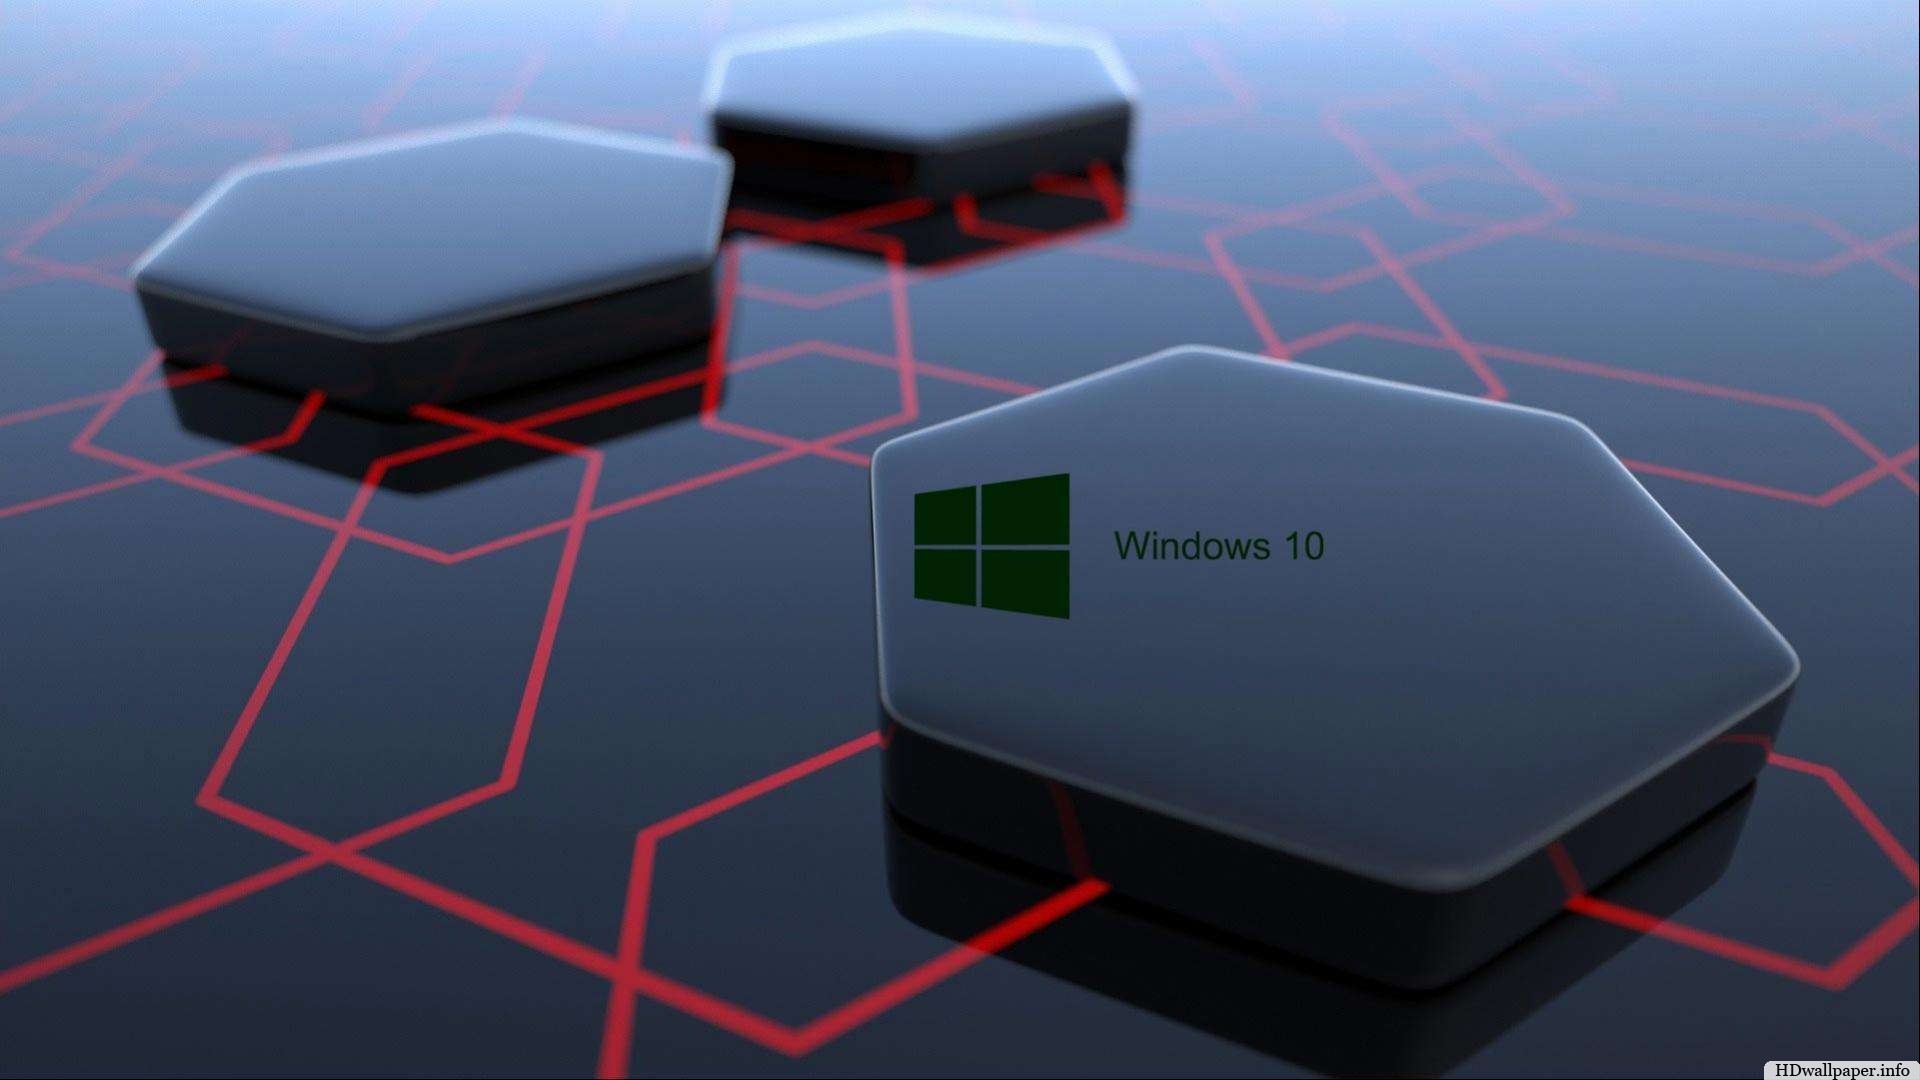 1920x1080 Windows 10 HD wallpaper | HD Wallpapers Hd Wallpapers For Laptop ...